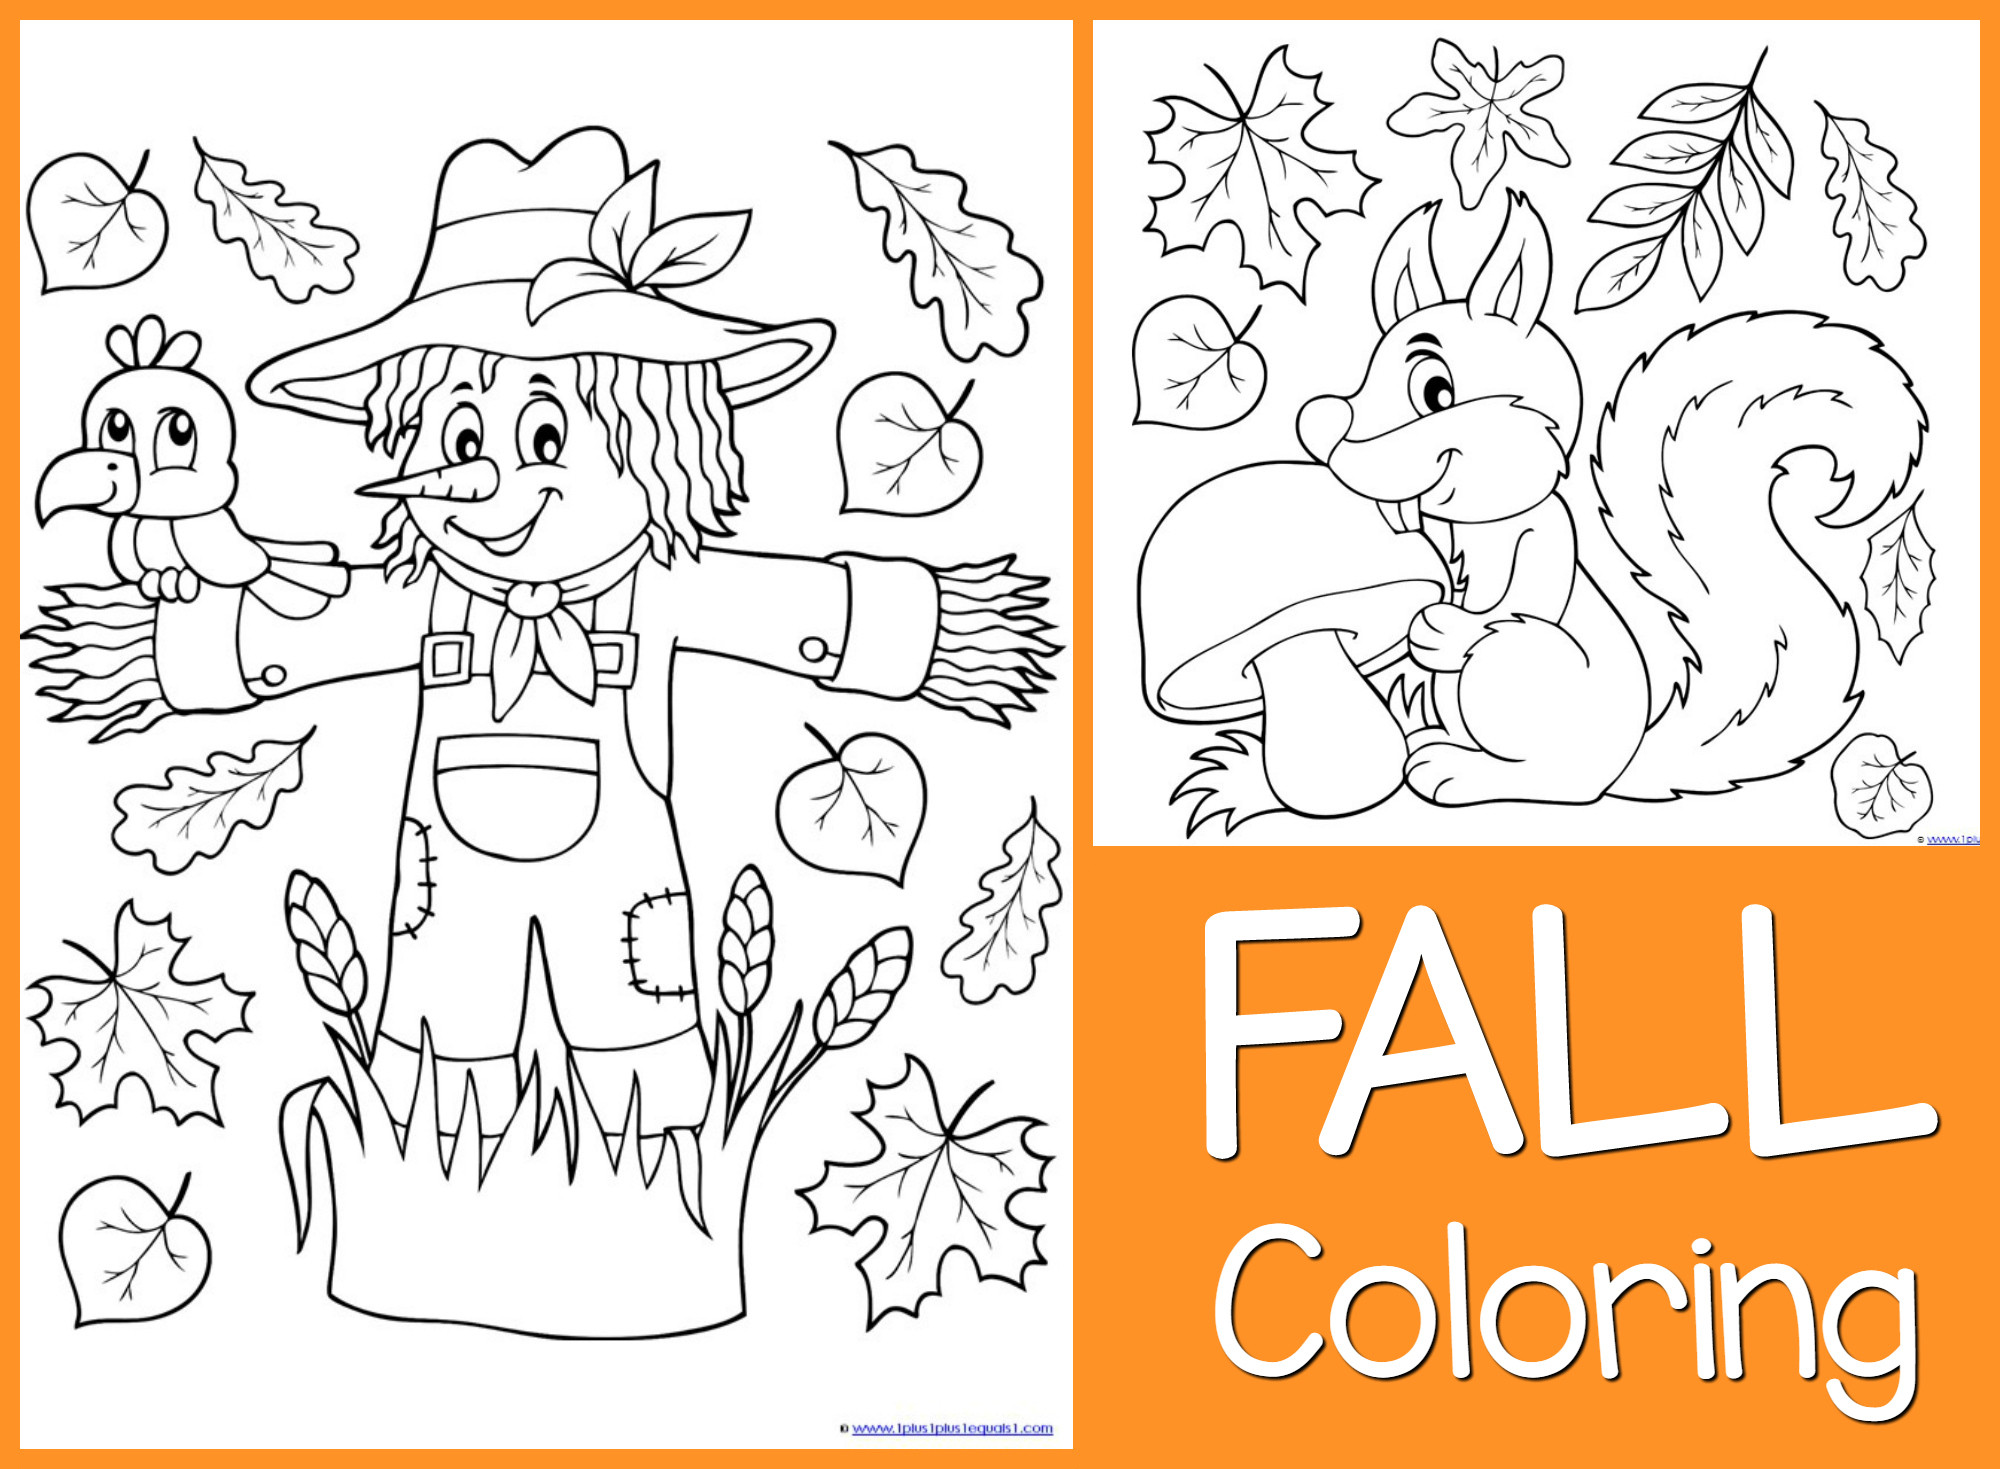 Free Fall Coloring Pages For Kids
 Just Color Free Coloring Printables